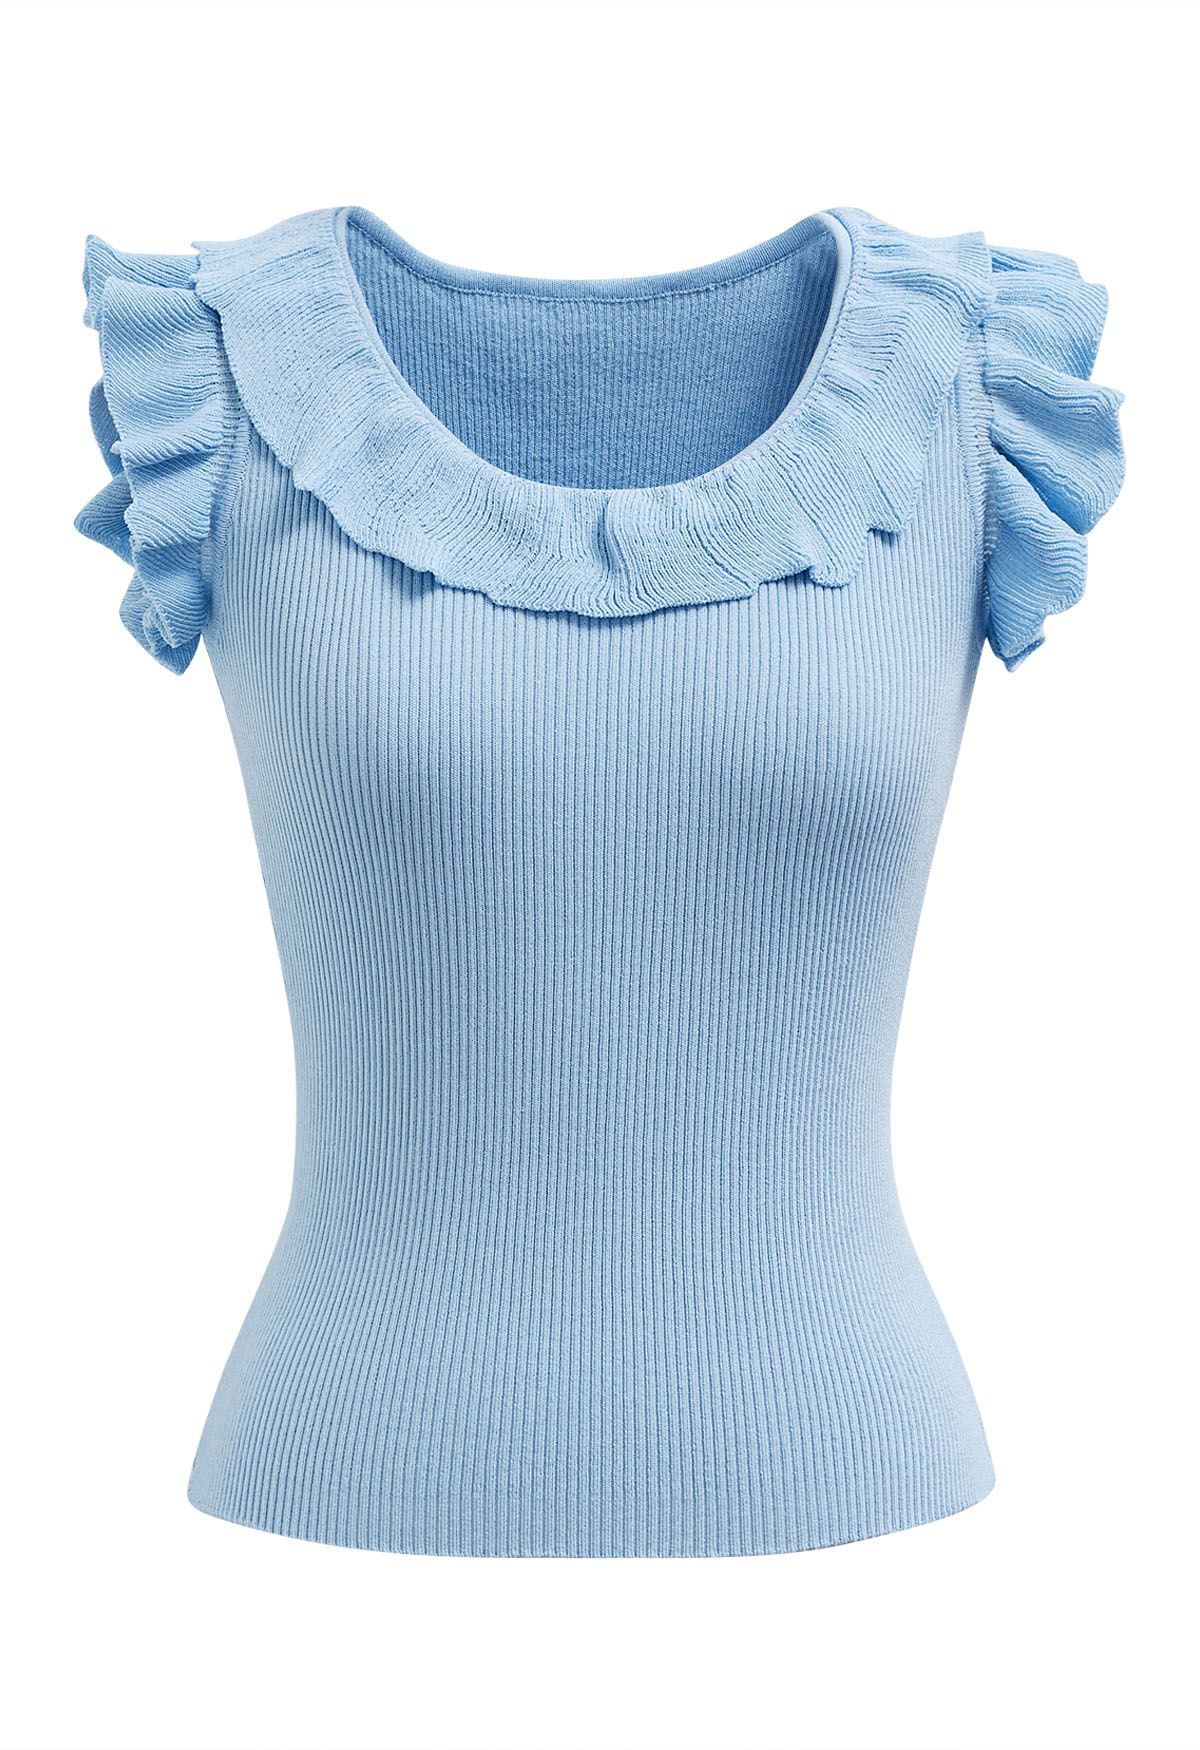 Ethereal Ruffle Sleeveless Knit Top in Blue | Chicwish